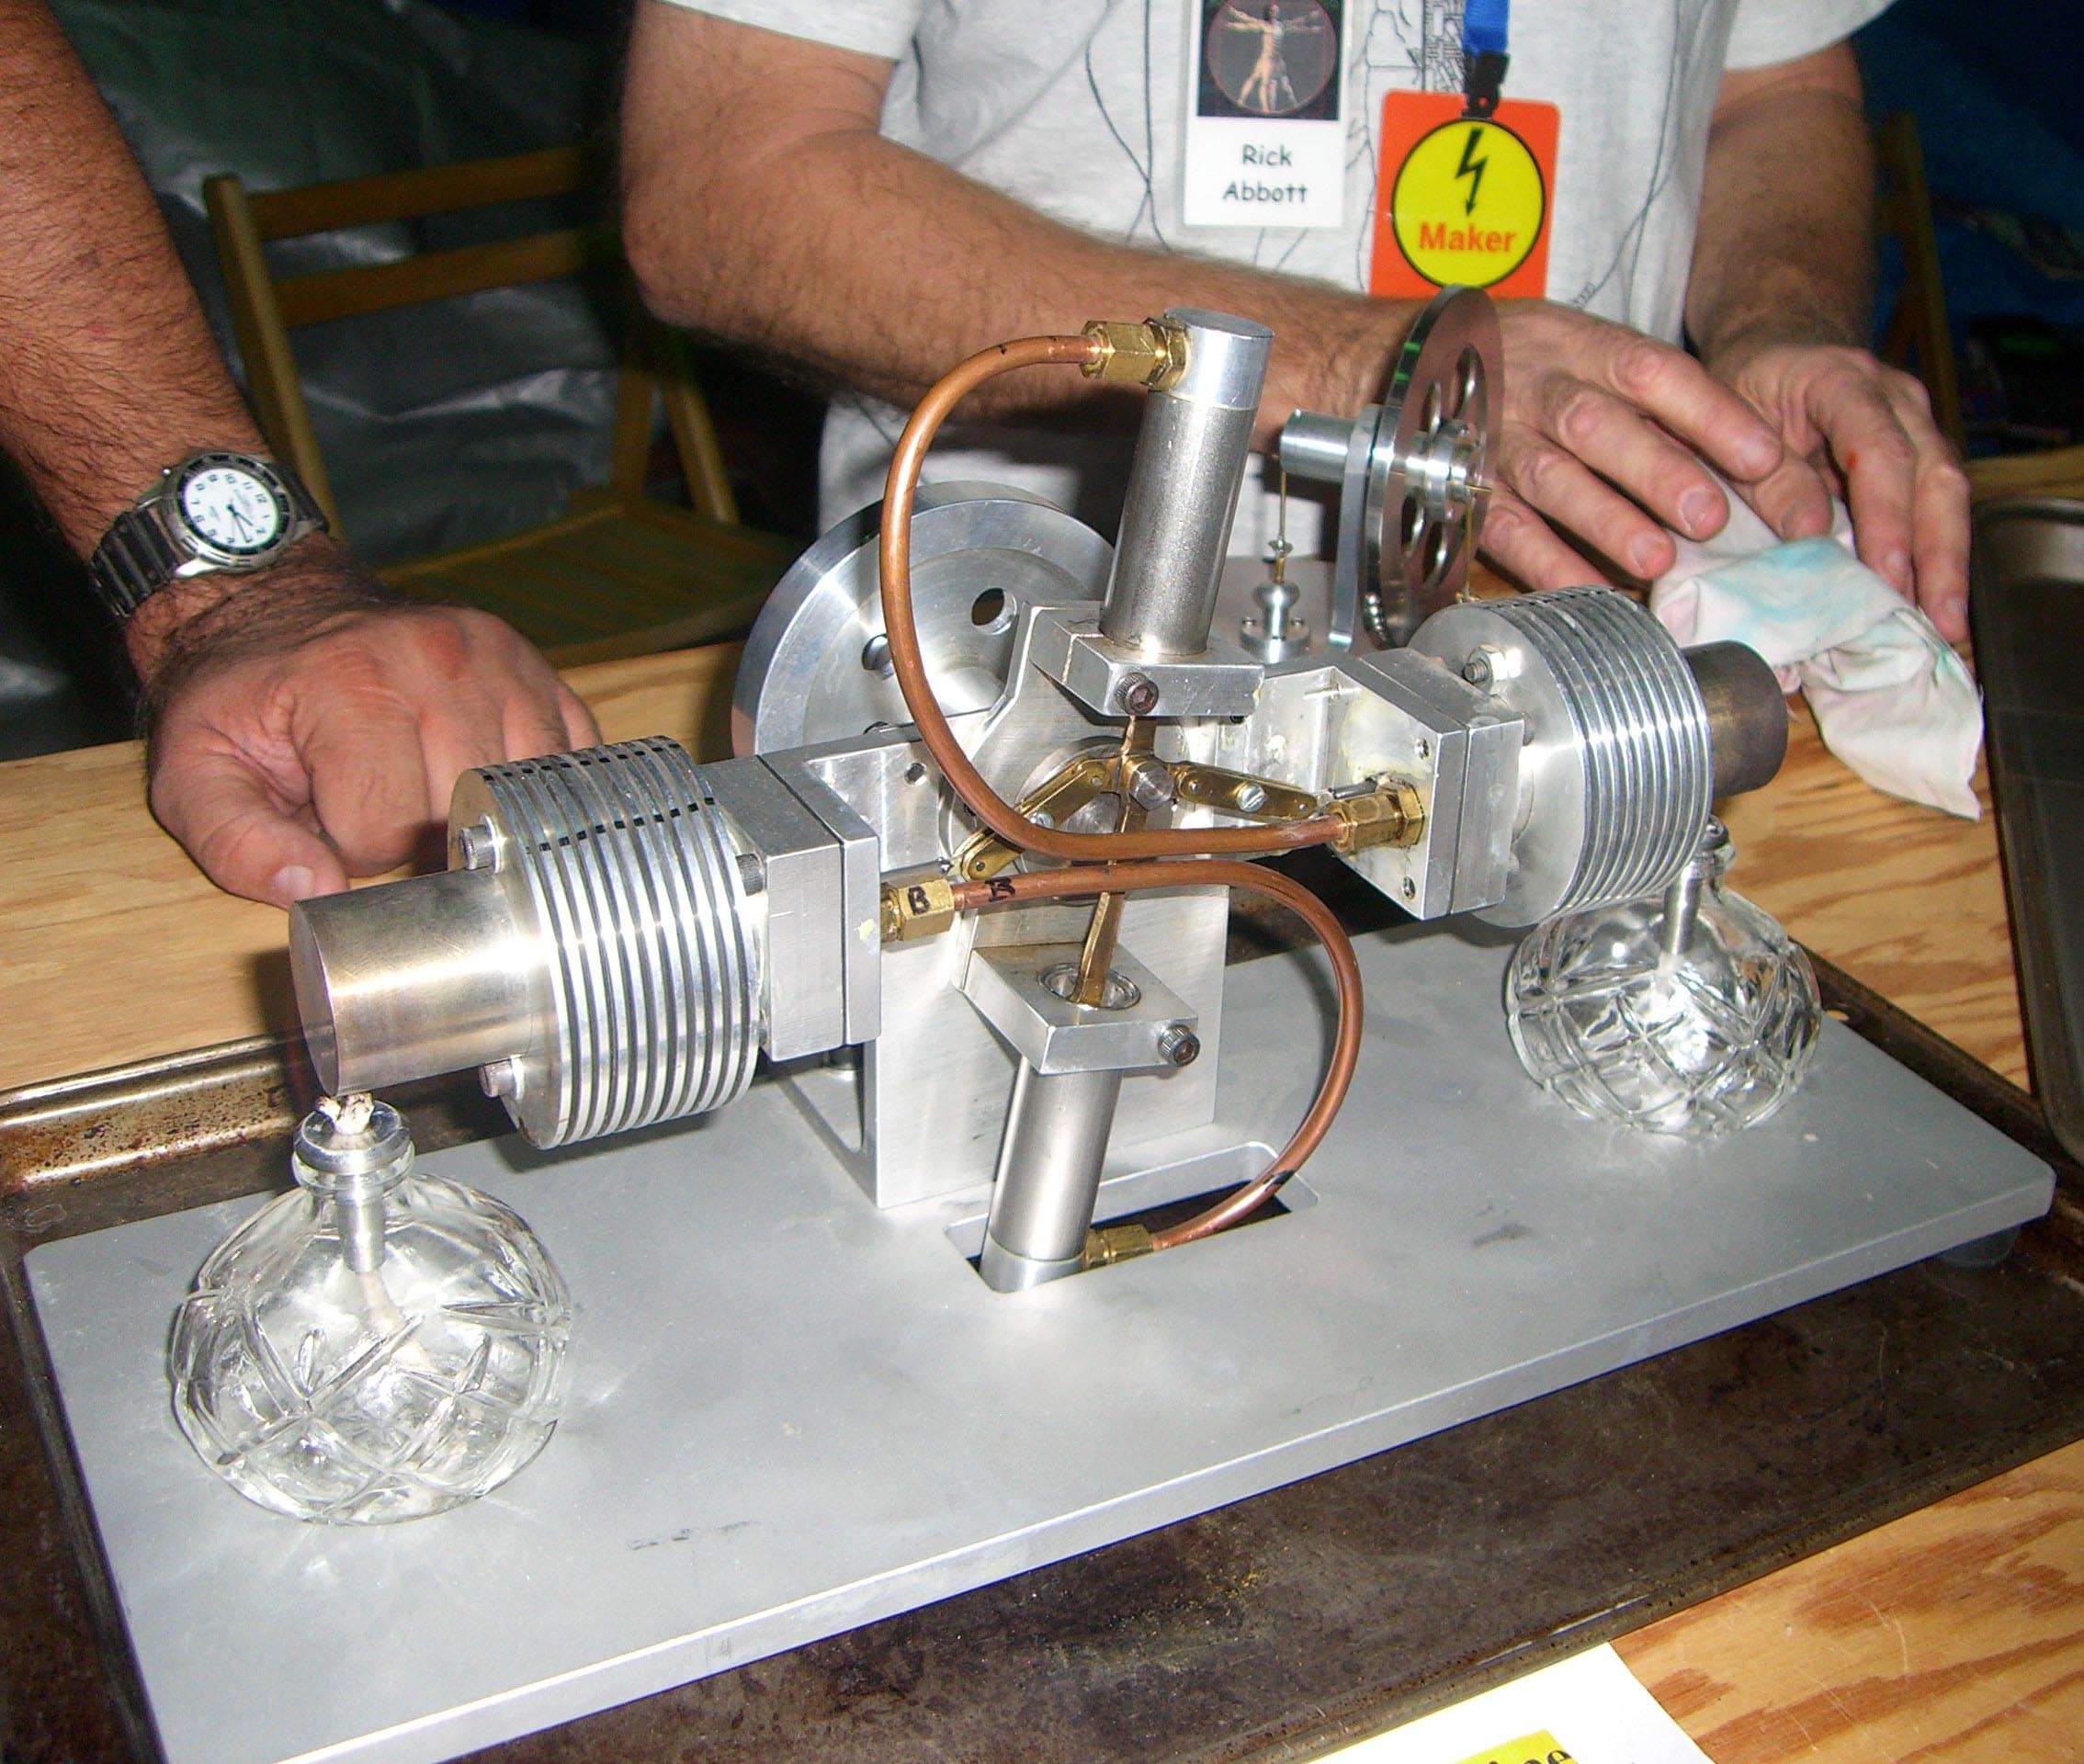 Stirling Engines at the Maker Faire 2007